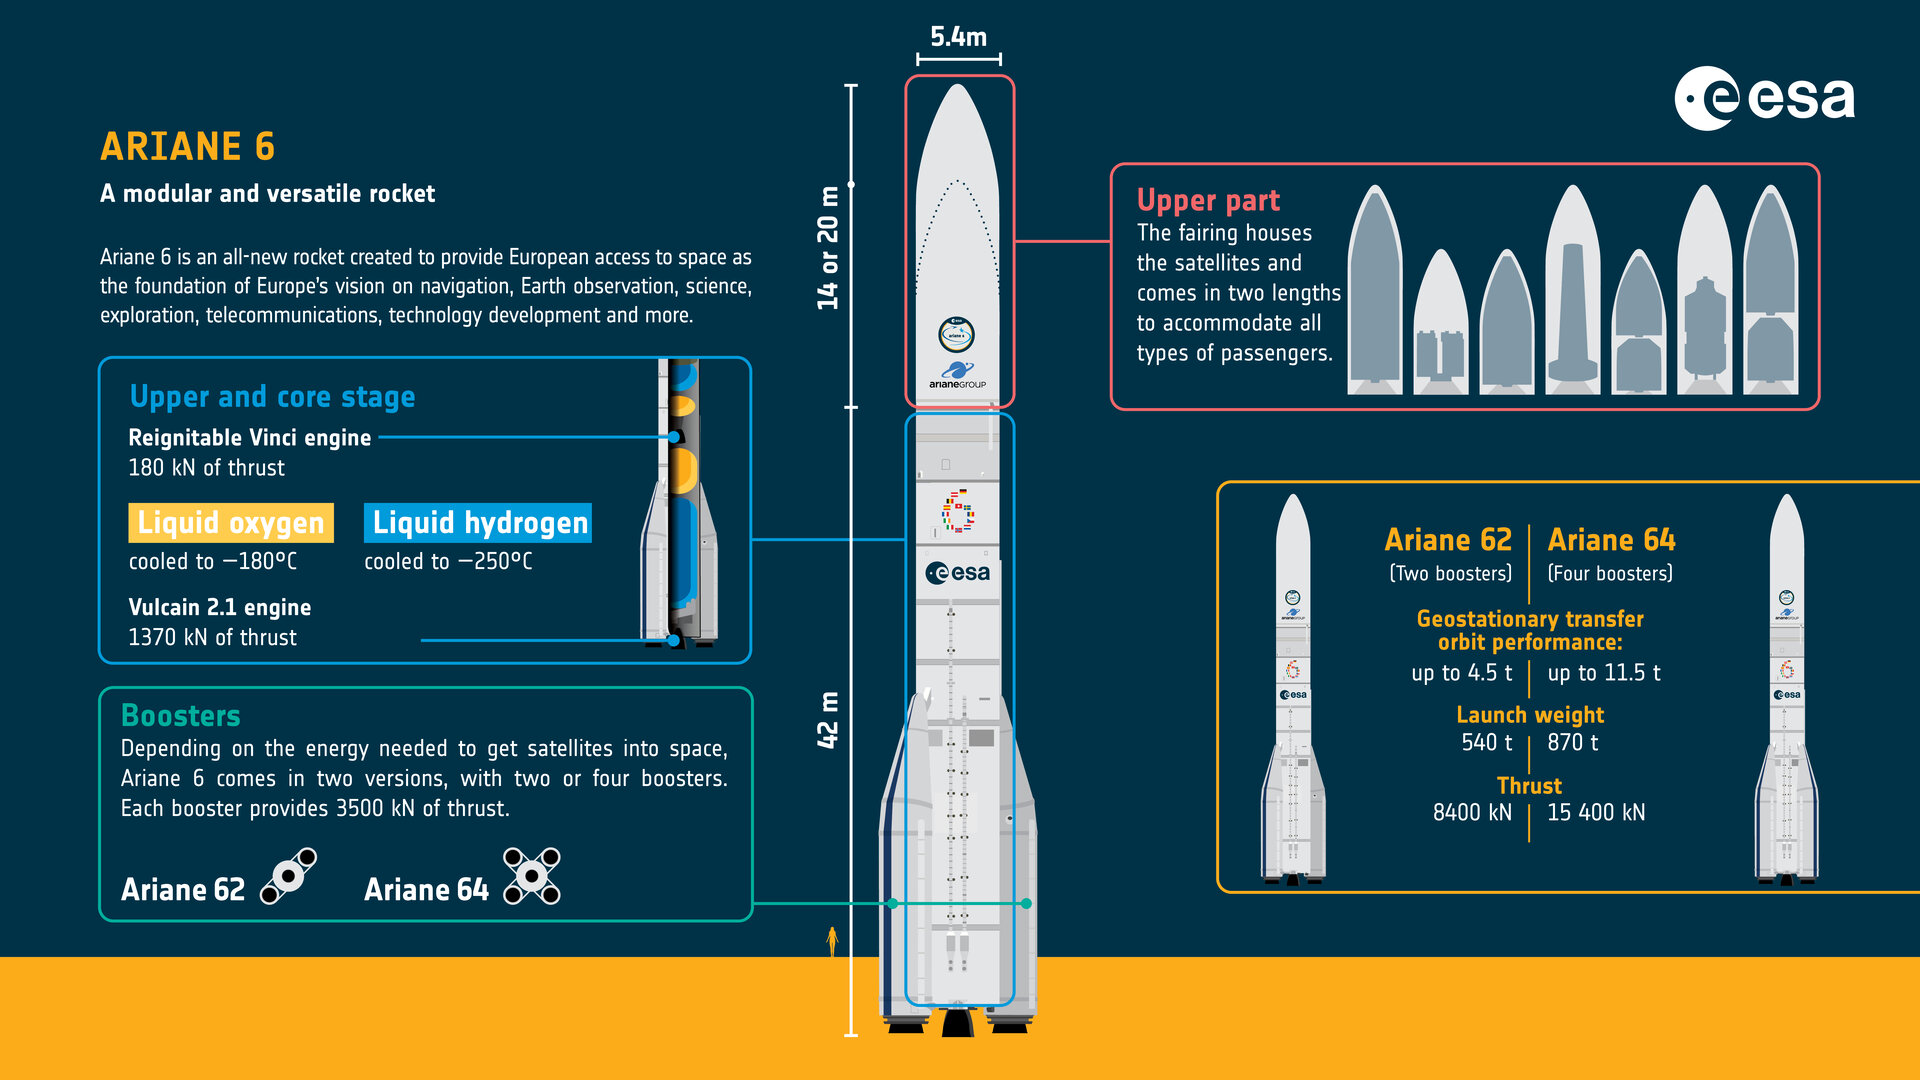 Ariane_6_infographic_at_a_glance_pillars